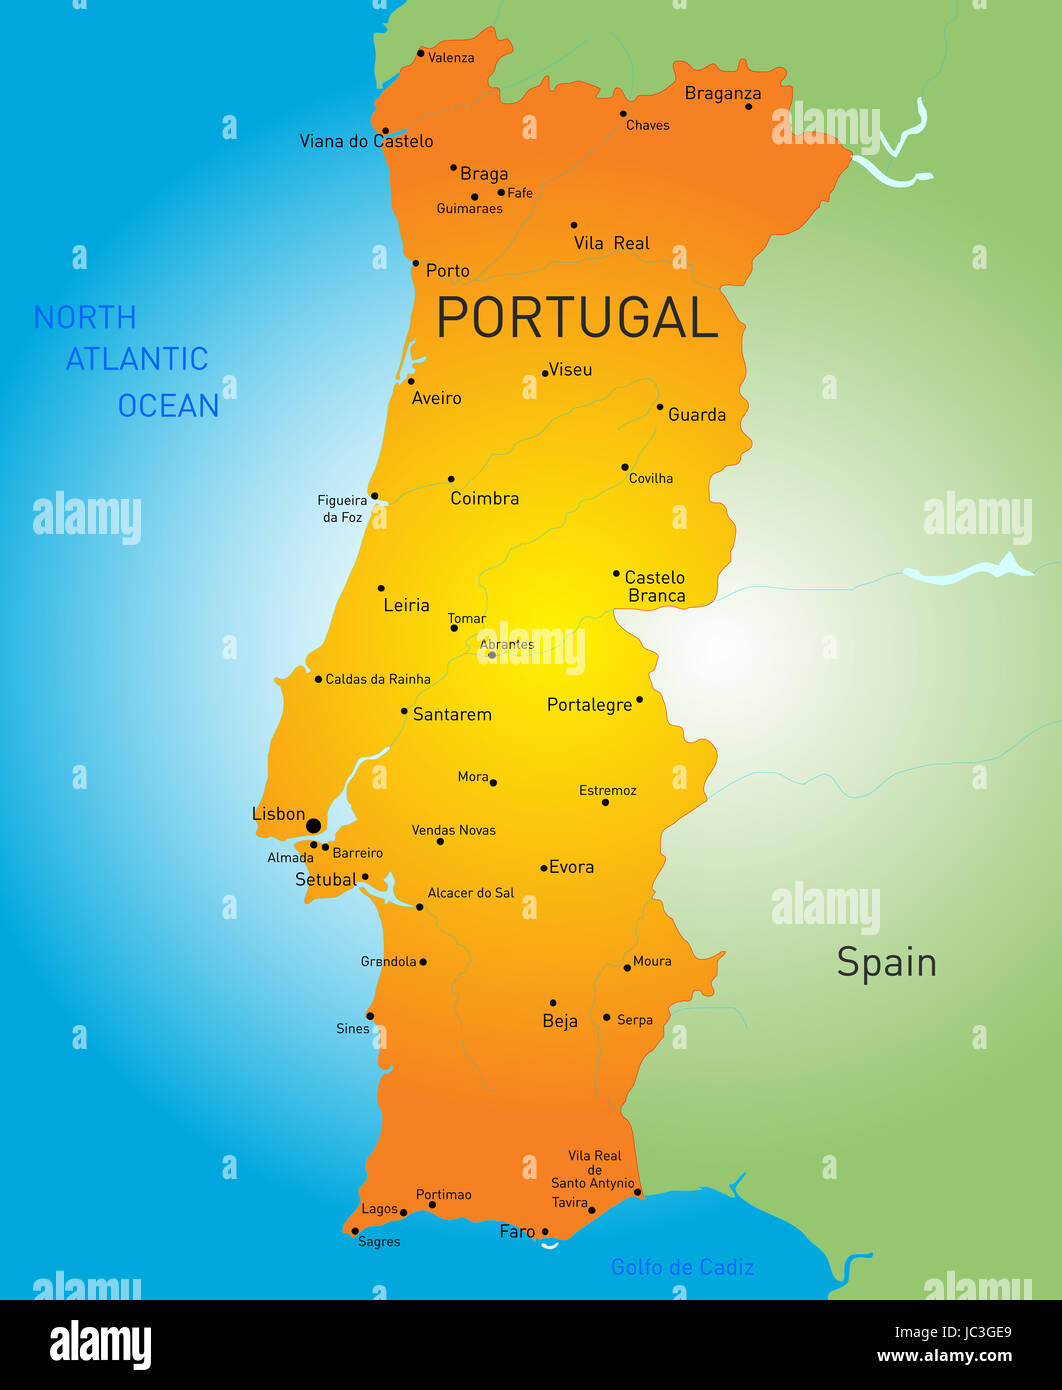 Vector Illustration of a Map of Europe with Highlighted Portugal Stock  Vector - Illustration of highlighted, region: 104200948